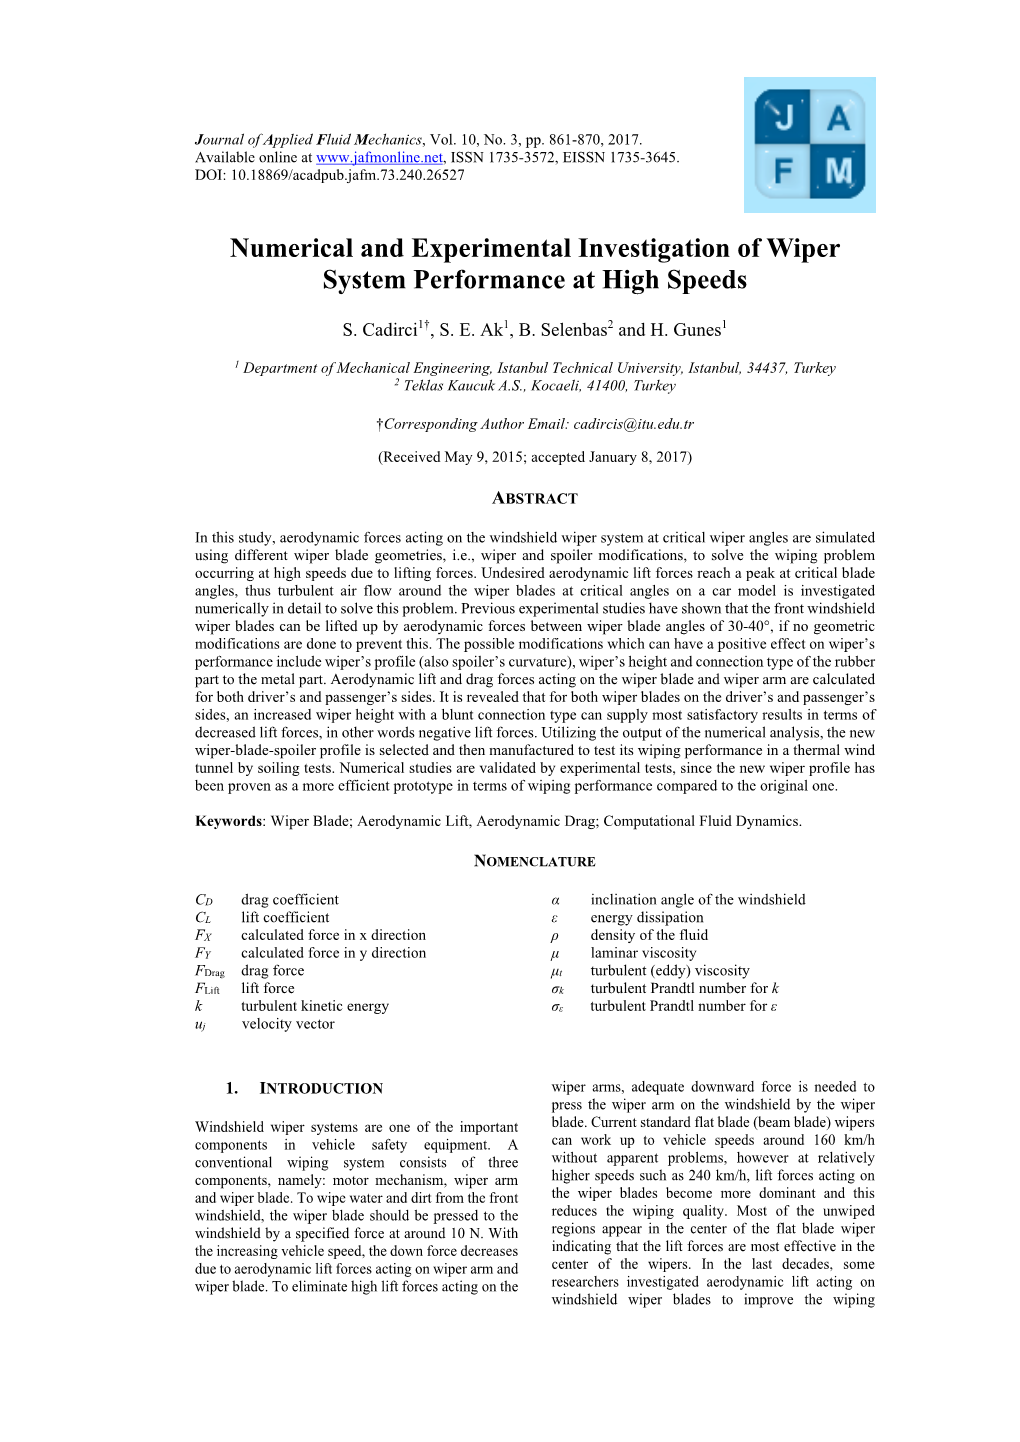 Numerical and Experimental Investigation of Wiper System Performance at High Speeds